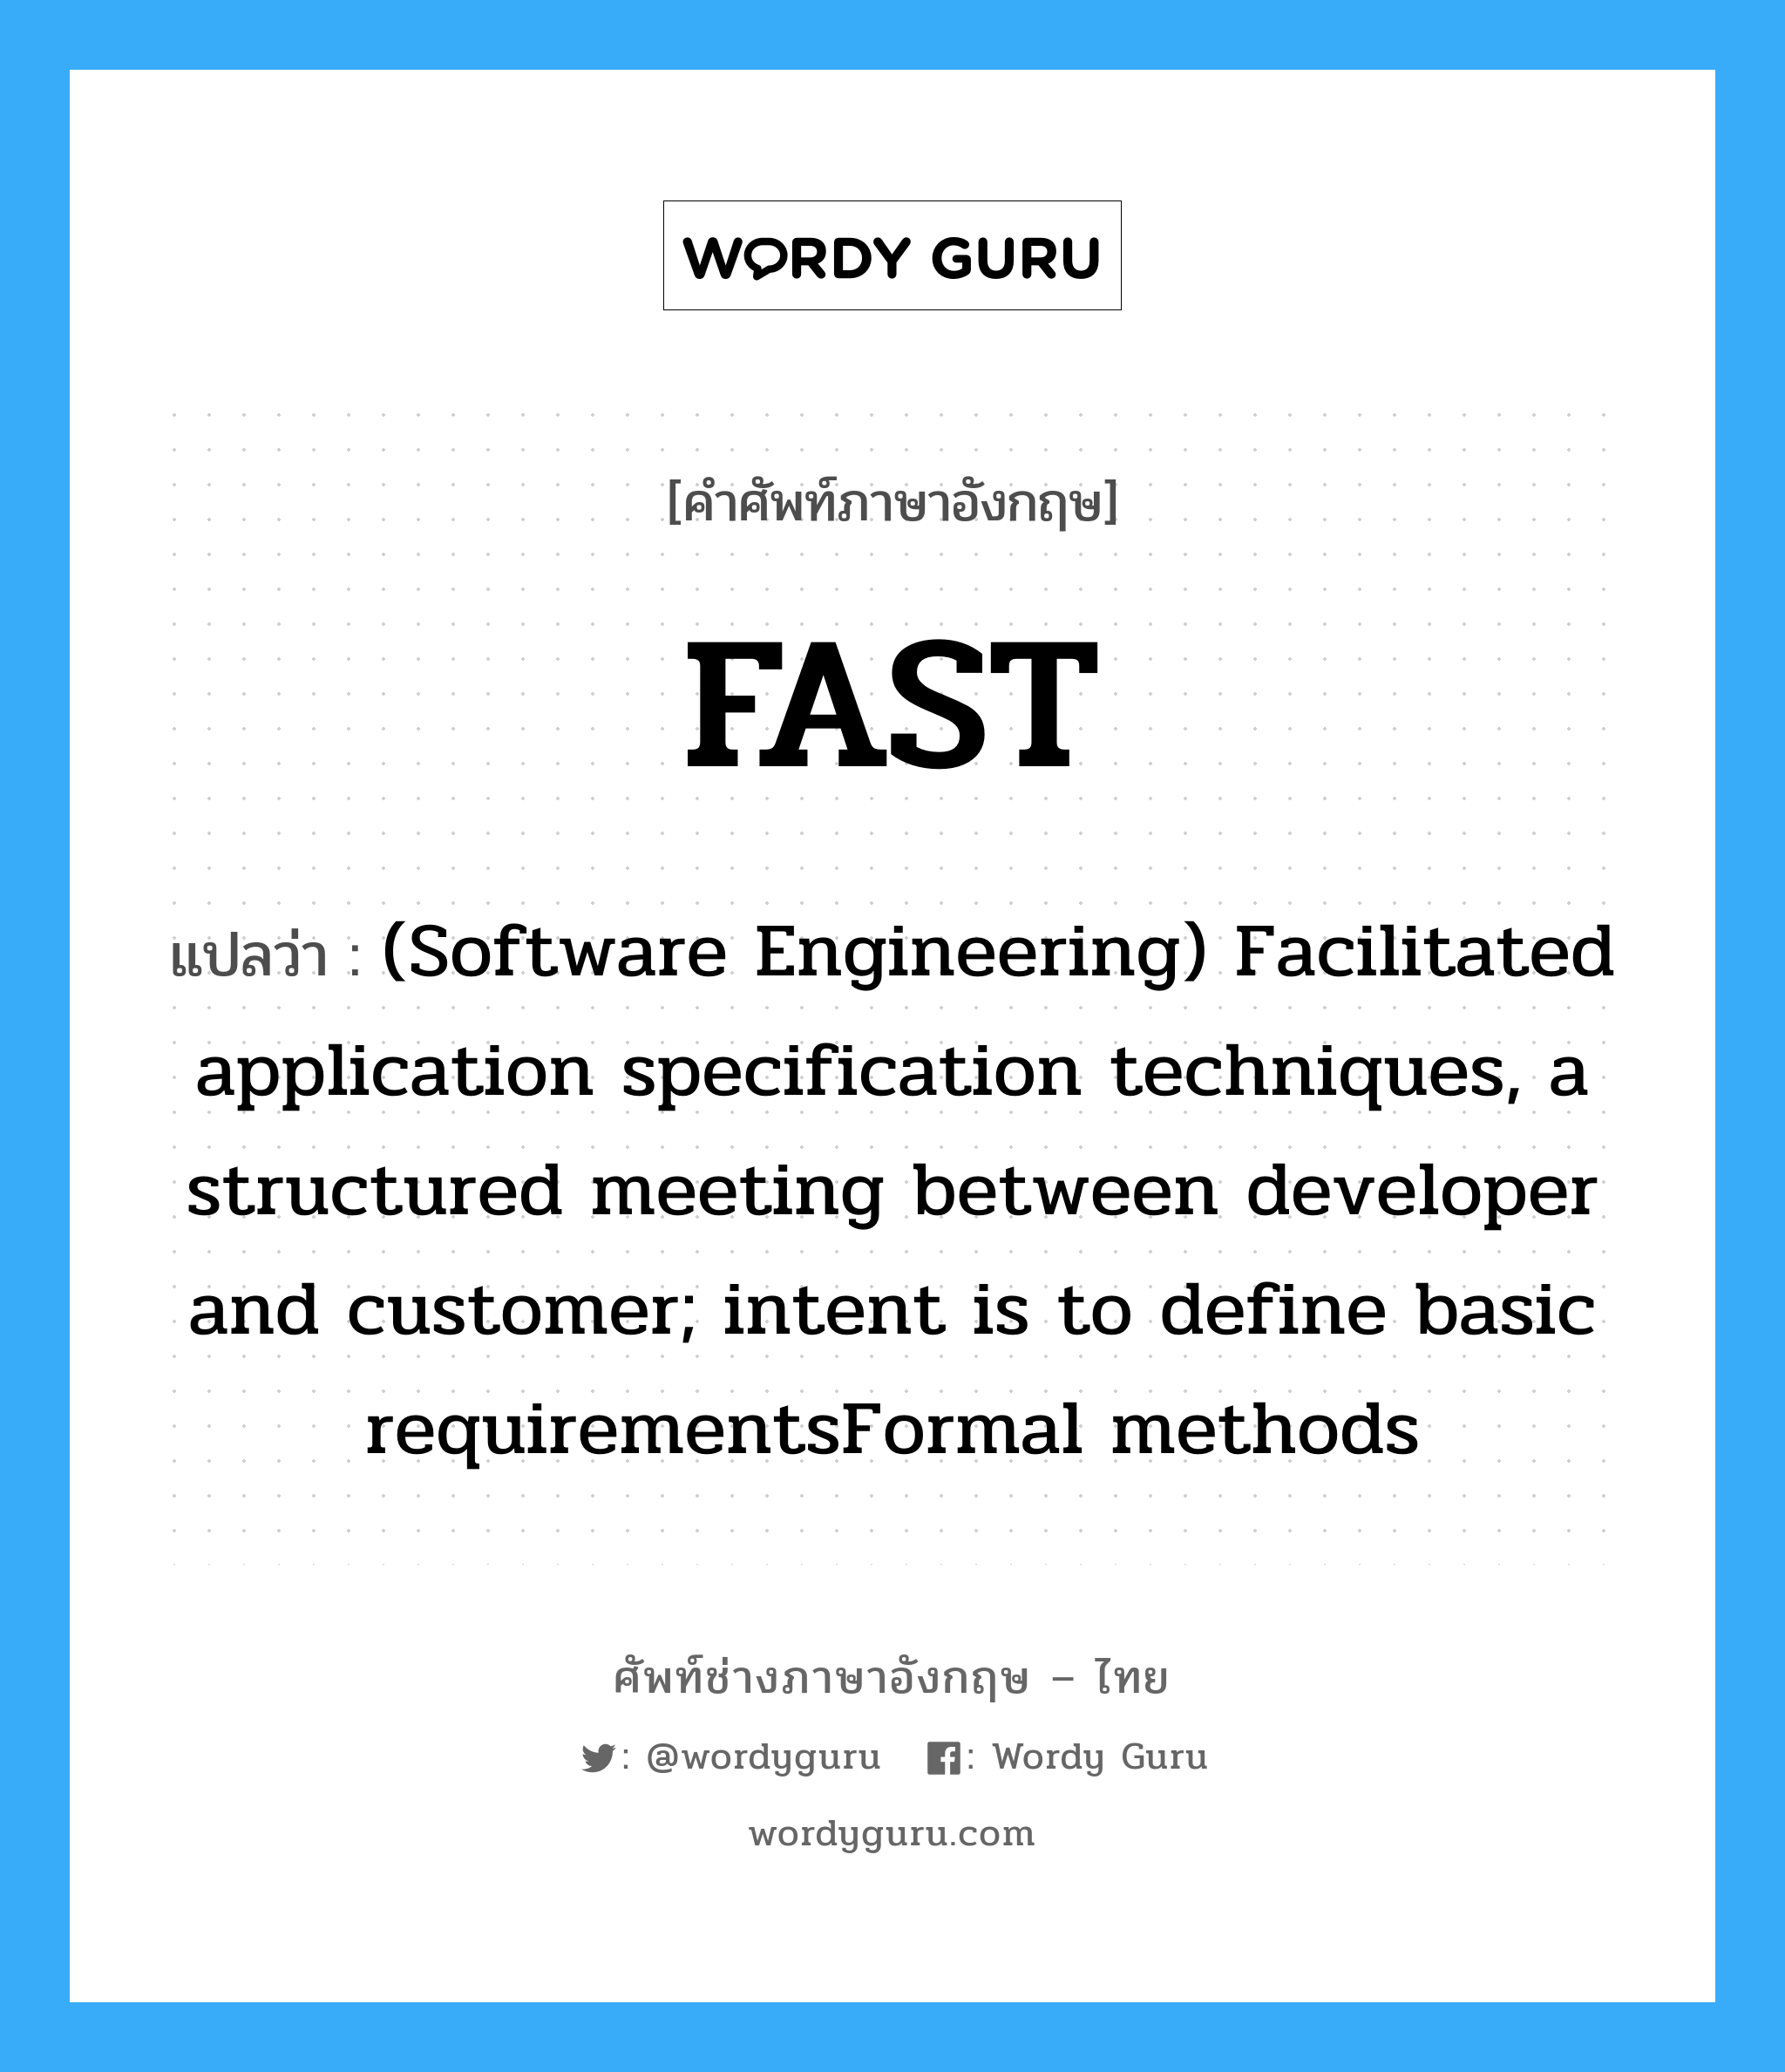 (Software Engineering) Facilitated application specification techniques, a structured meeting between developer and customer; intent is to define basic requirementsFormal methods ภาษาอังกฤษ?, คำศัพท์ช่างภาษาอังกฤษ - ไทย (Software Engineering) Facilitated application specification techniques, a structured meeting between developer and customer; intent is to define basic requirementsFormal methods คำศัพท์ภาษาอังกฤษ (Software Engineering) Facilitated application specification techniques, a structured meeting between developer and customer; intent is to define basic requirementsFormal methods แปลว่า FAST